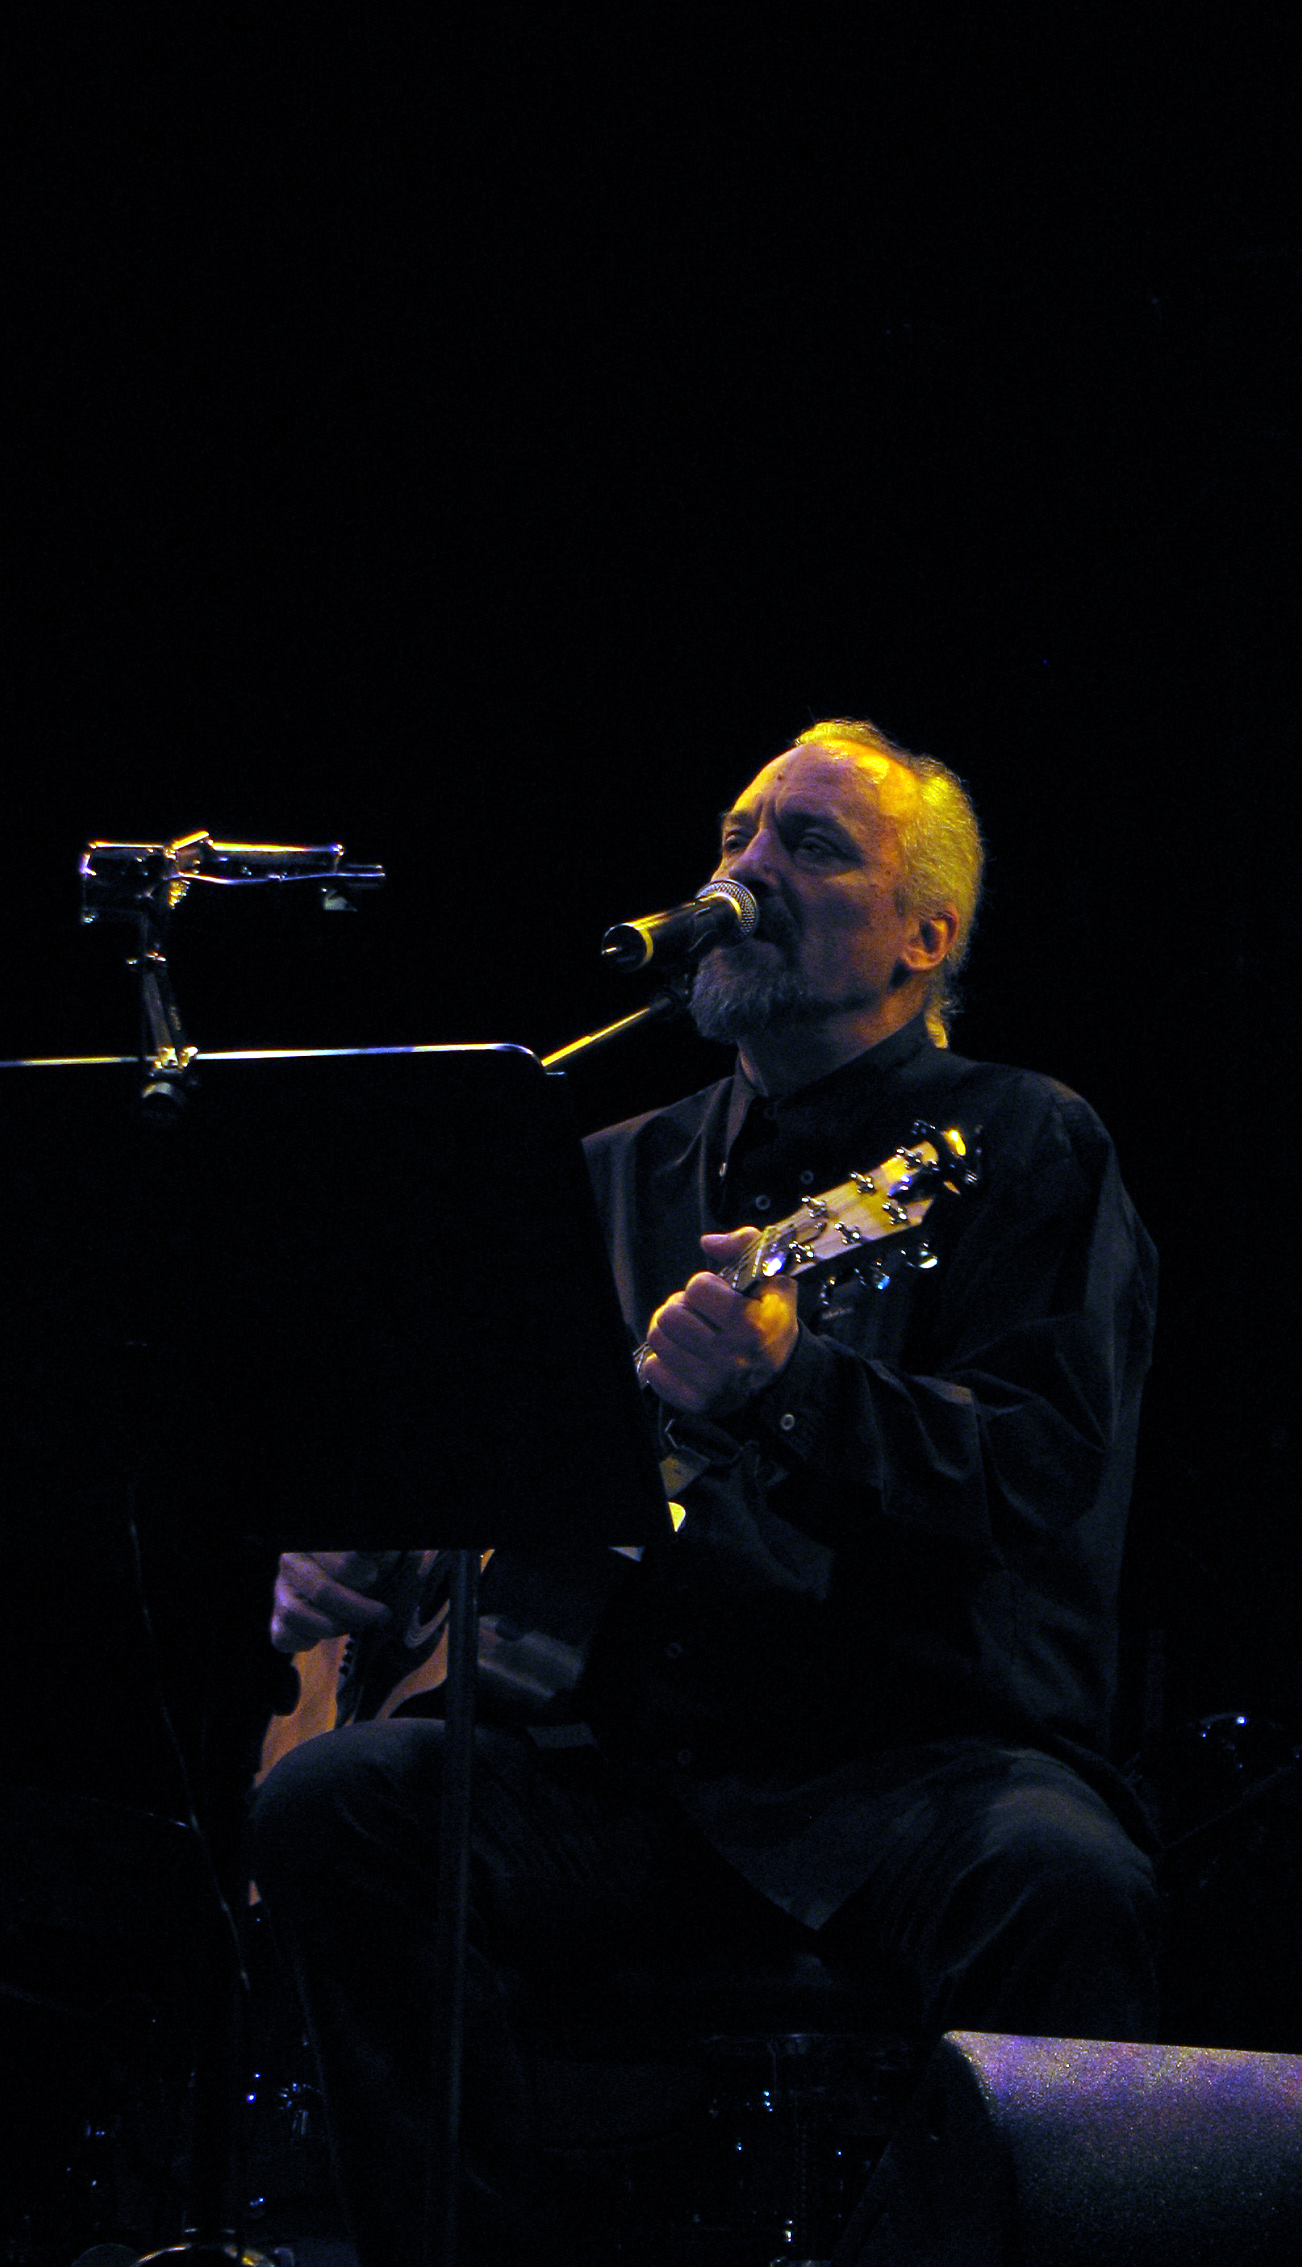 a man playing a guitar while performing in front of microphones